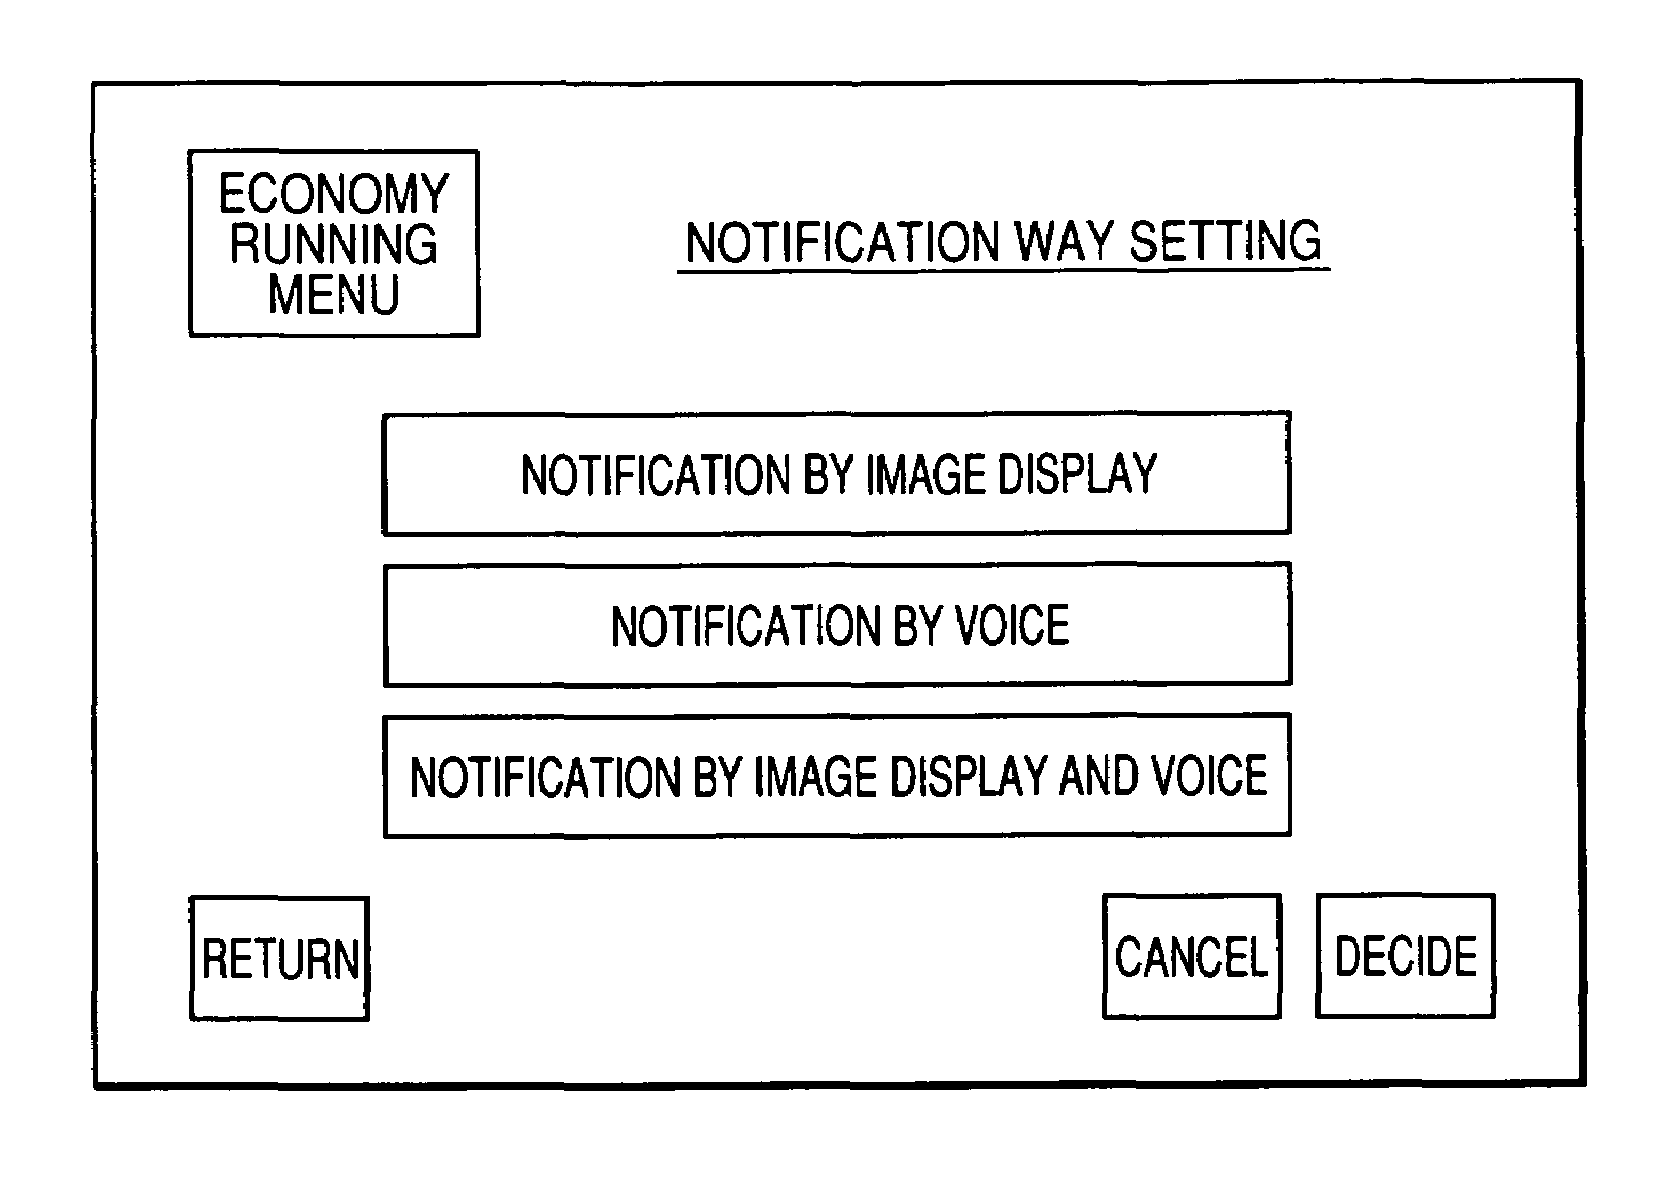 Economy running system, economy running controller and navigation apparatus